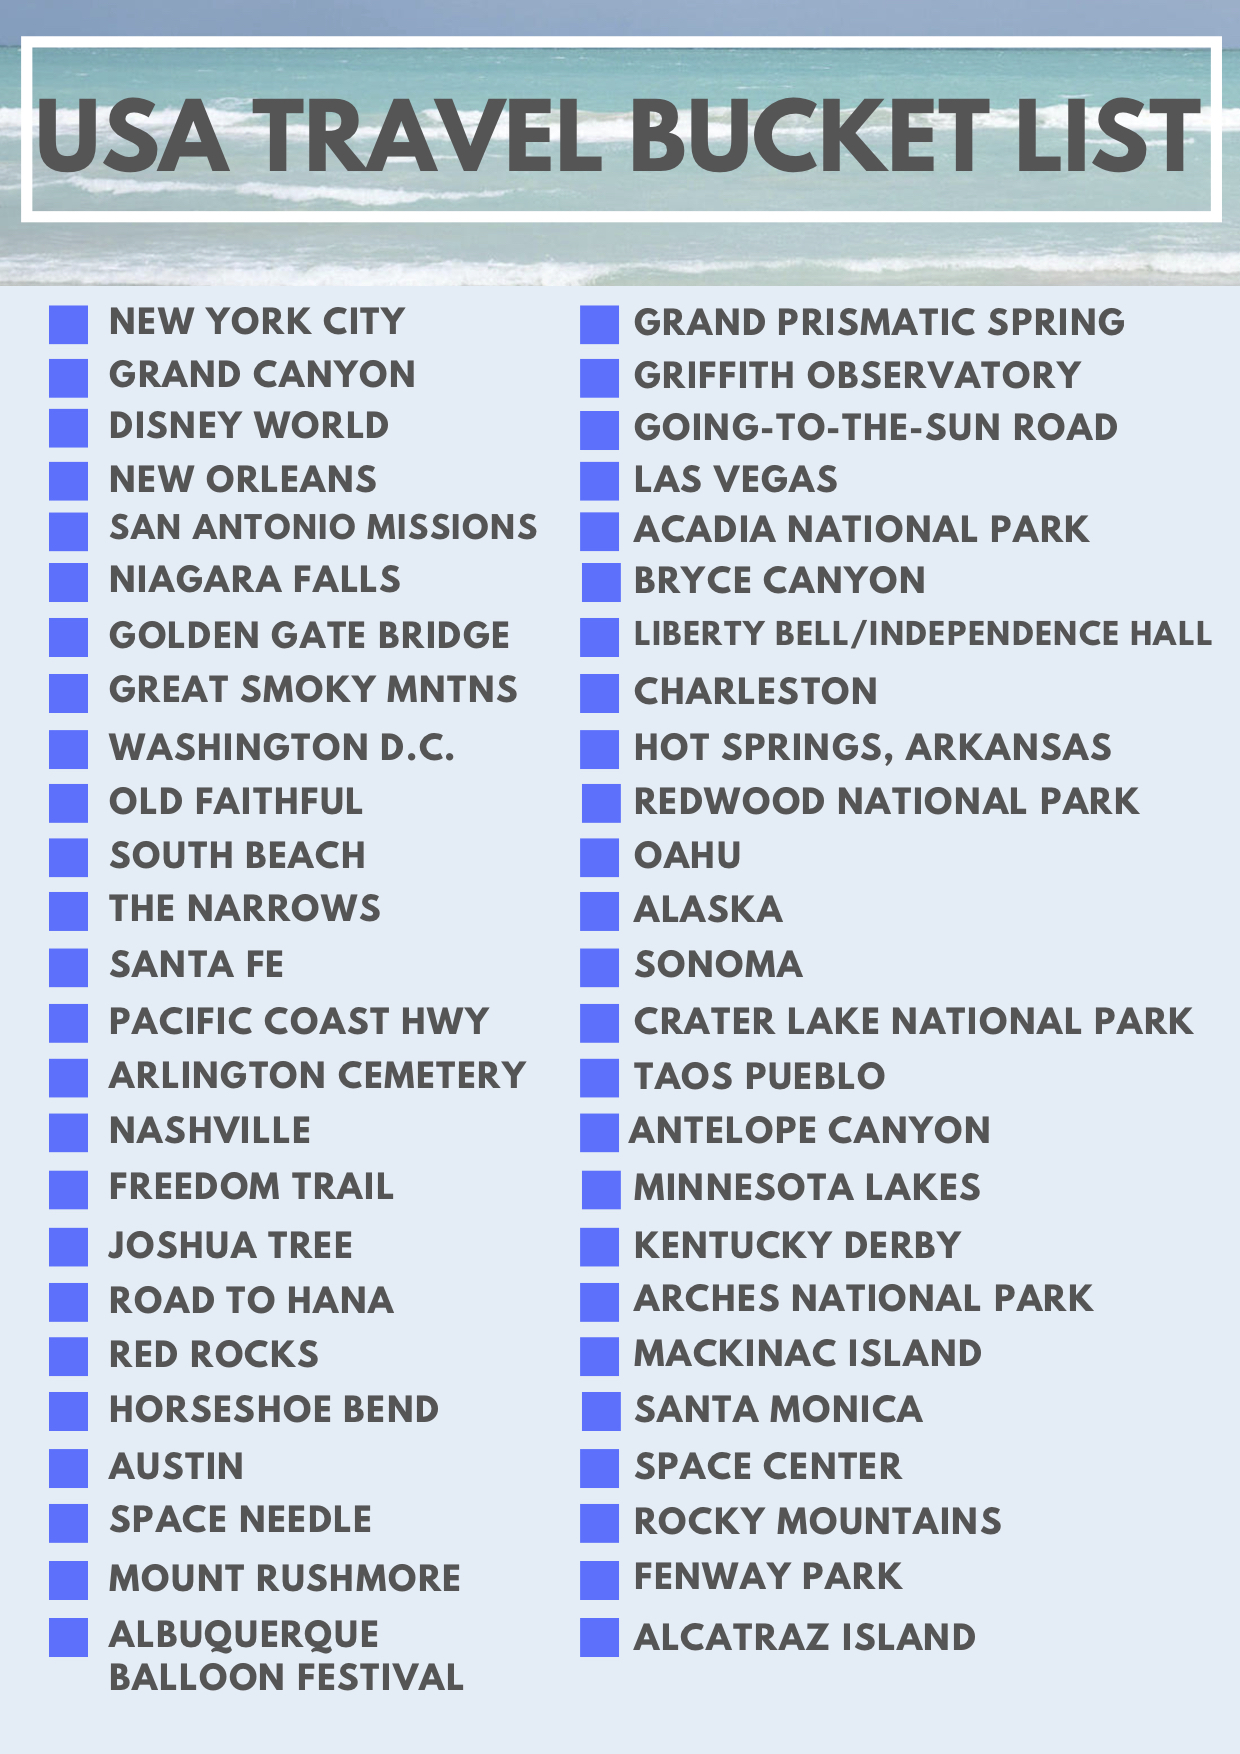 check off list of states